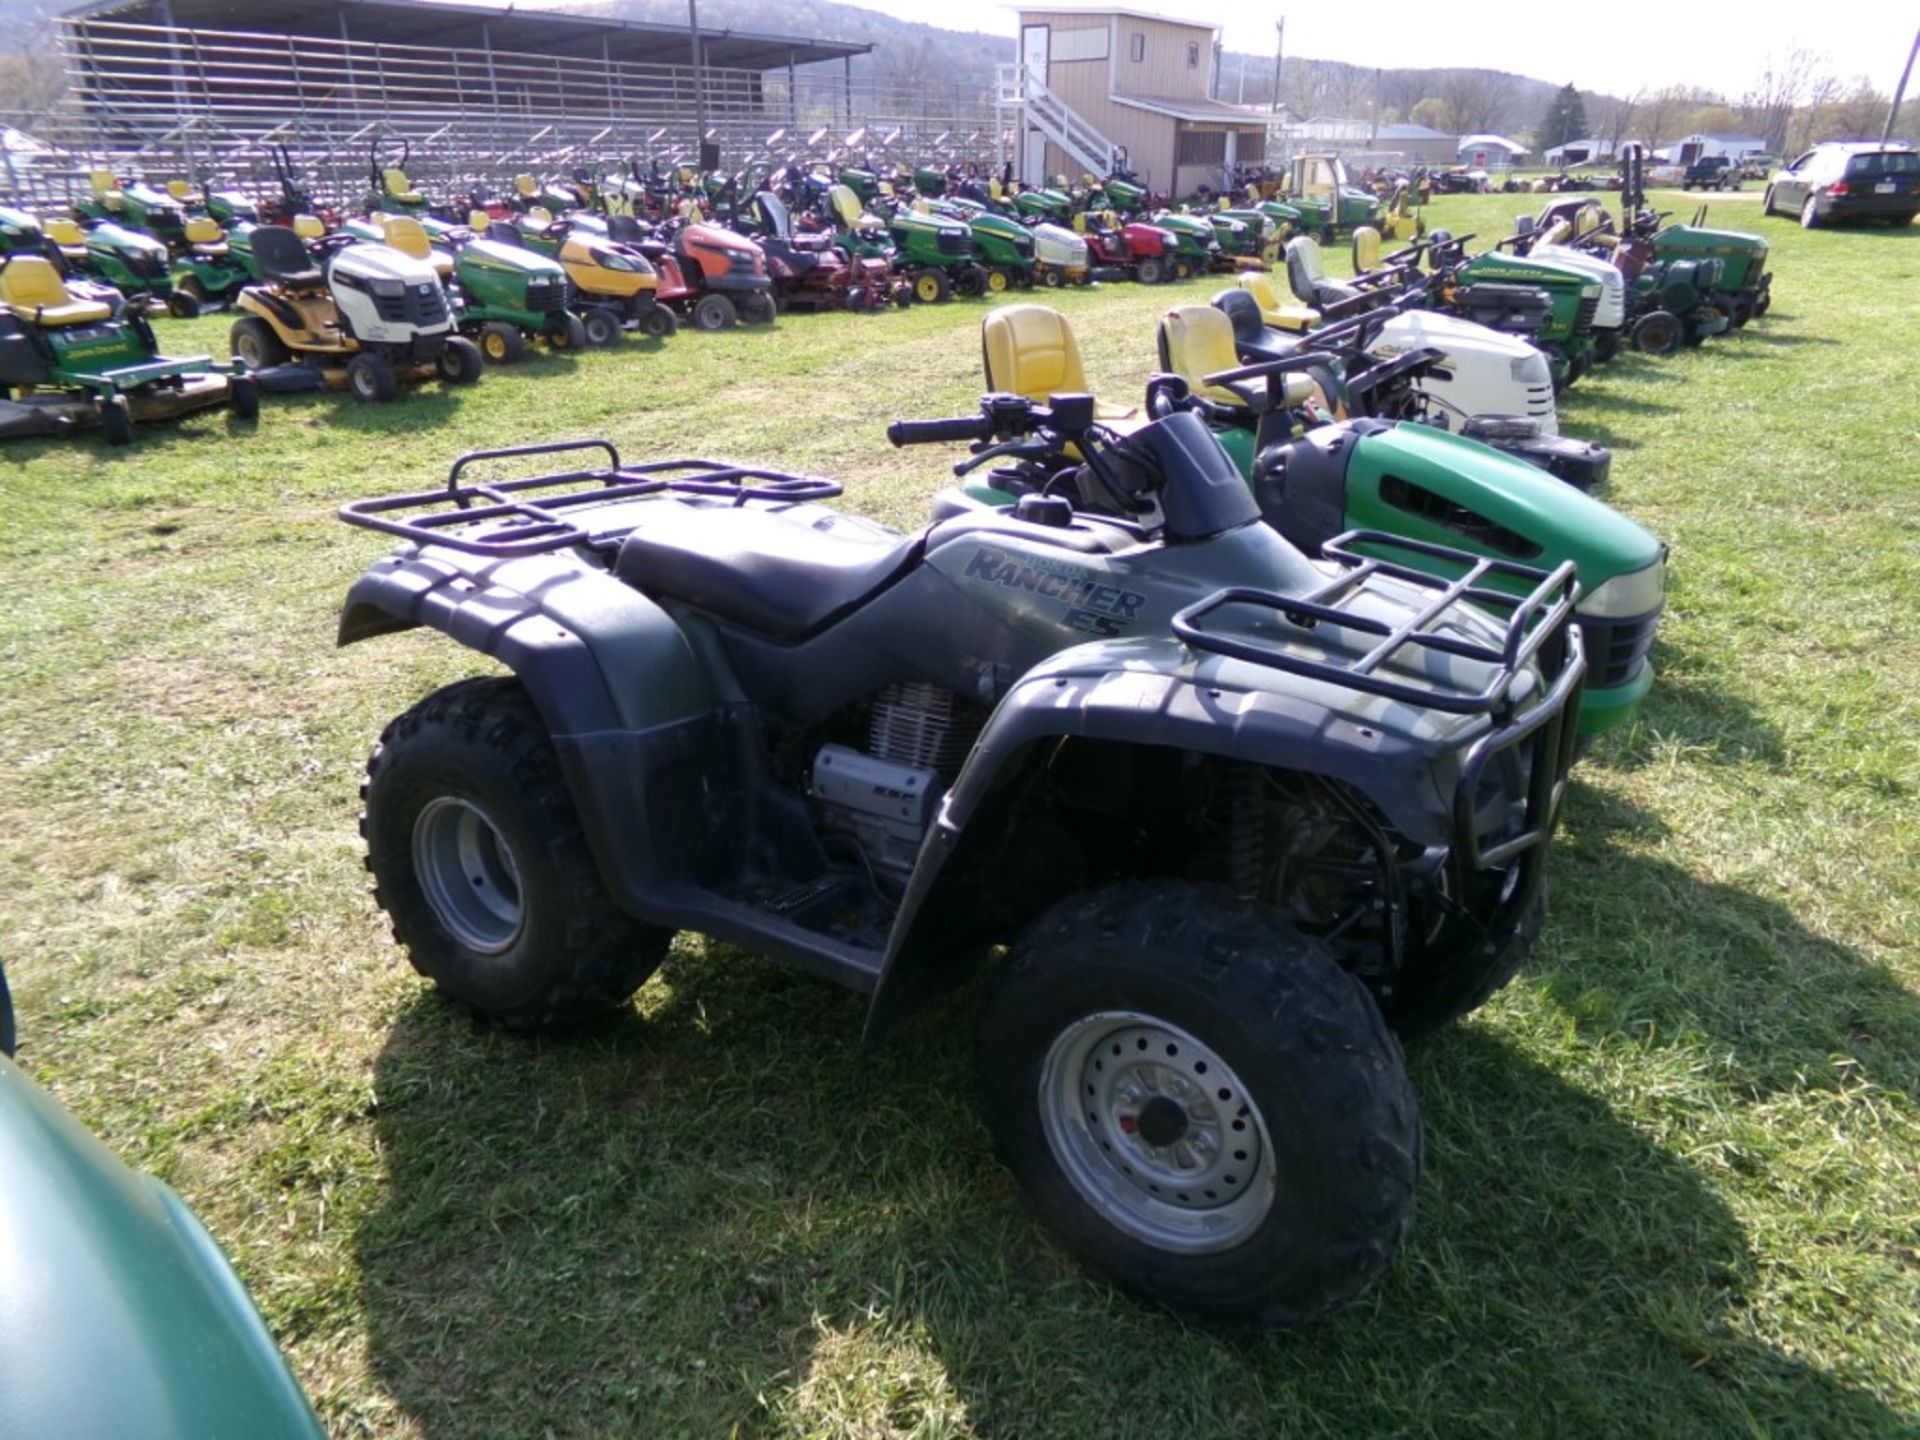 Honda Rancher ES 2wd ATV, Electronic Shift, 2002 Model, 2792 Miles, NO PAPERWORK / BOS ONLY (5583) - Image 2 of 2